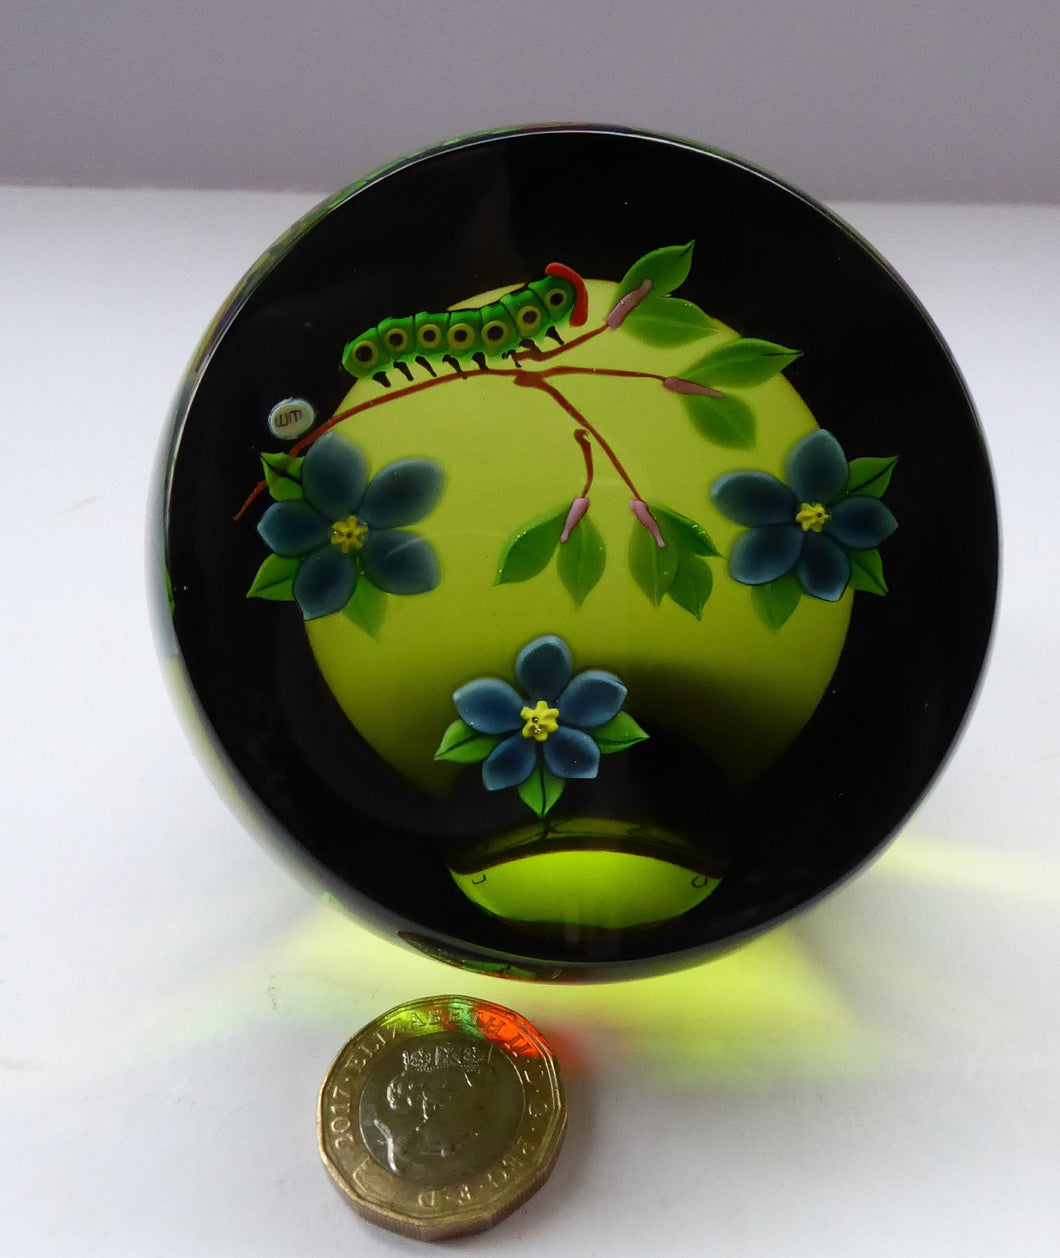 993 Limited Edition Caithness CATERPILLAR Paperweight by William Manson